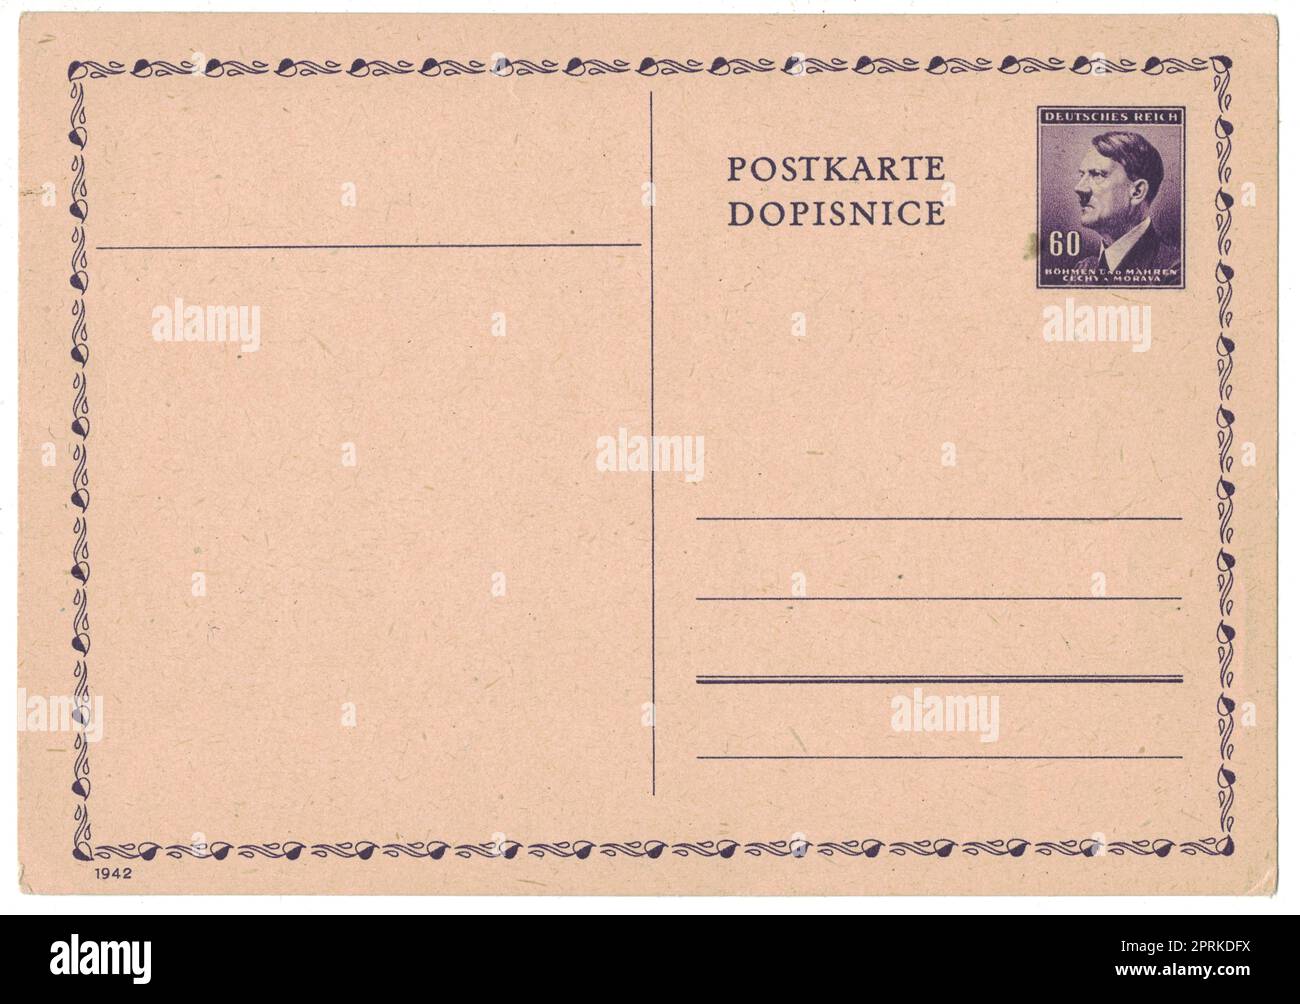 GERMANY (PROTECTORATE OF BOHEMIA AND MORAVIA) - CIRCA 1942: Old postal card with printed post stamp shows portrait of Adolf Hitler (politician, leader Stock Photo